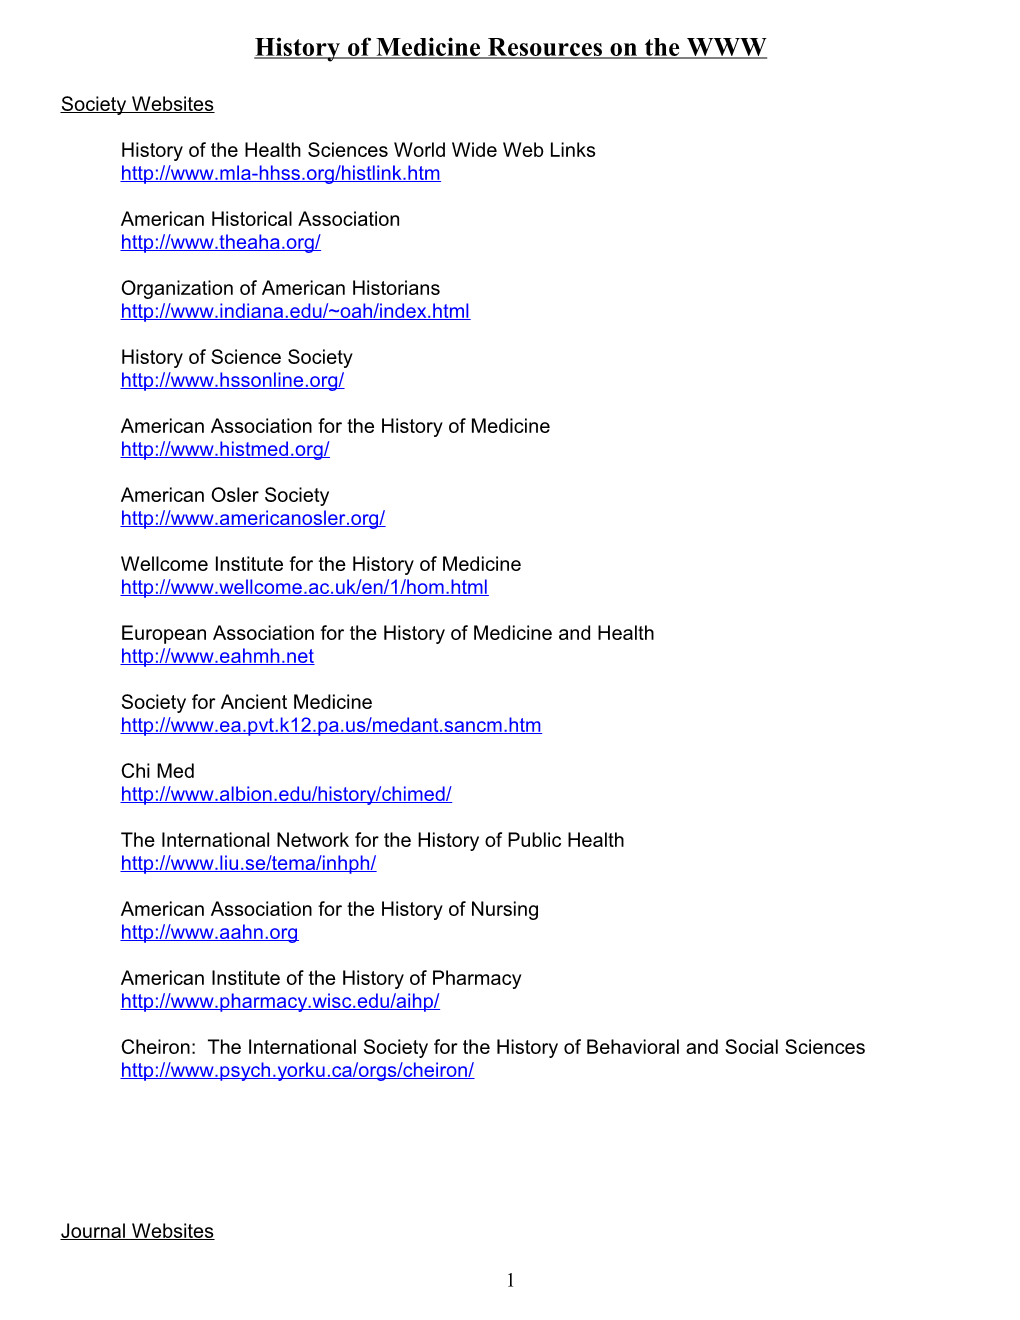 History of Medicine Resources on the WWW